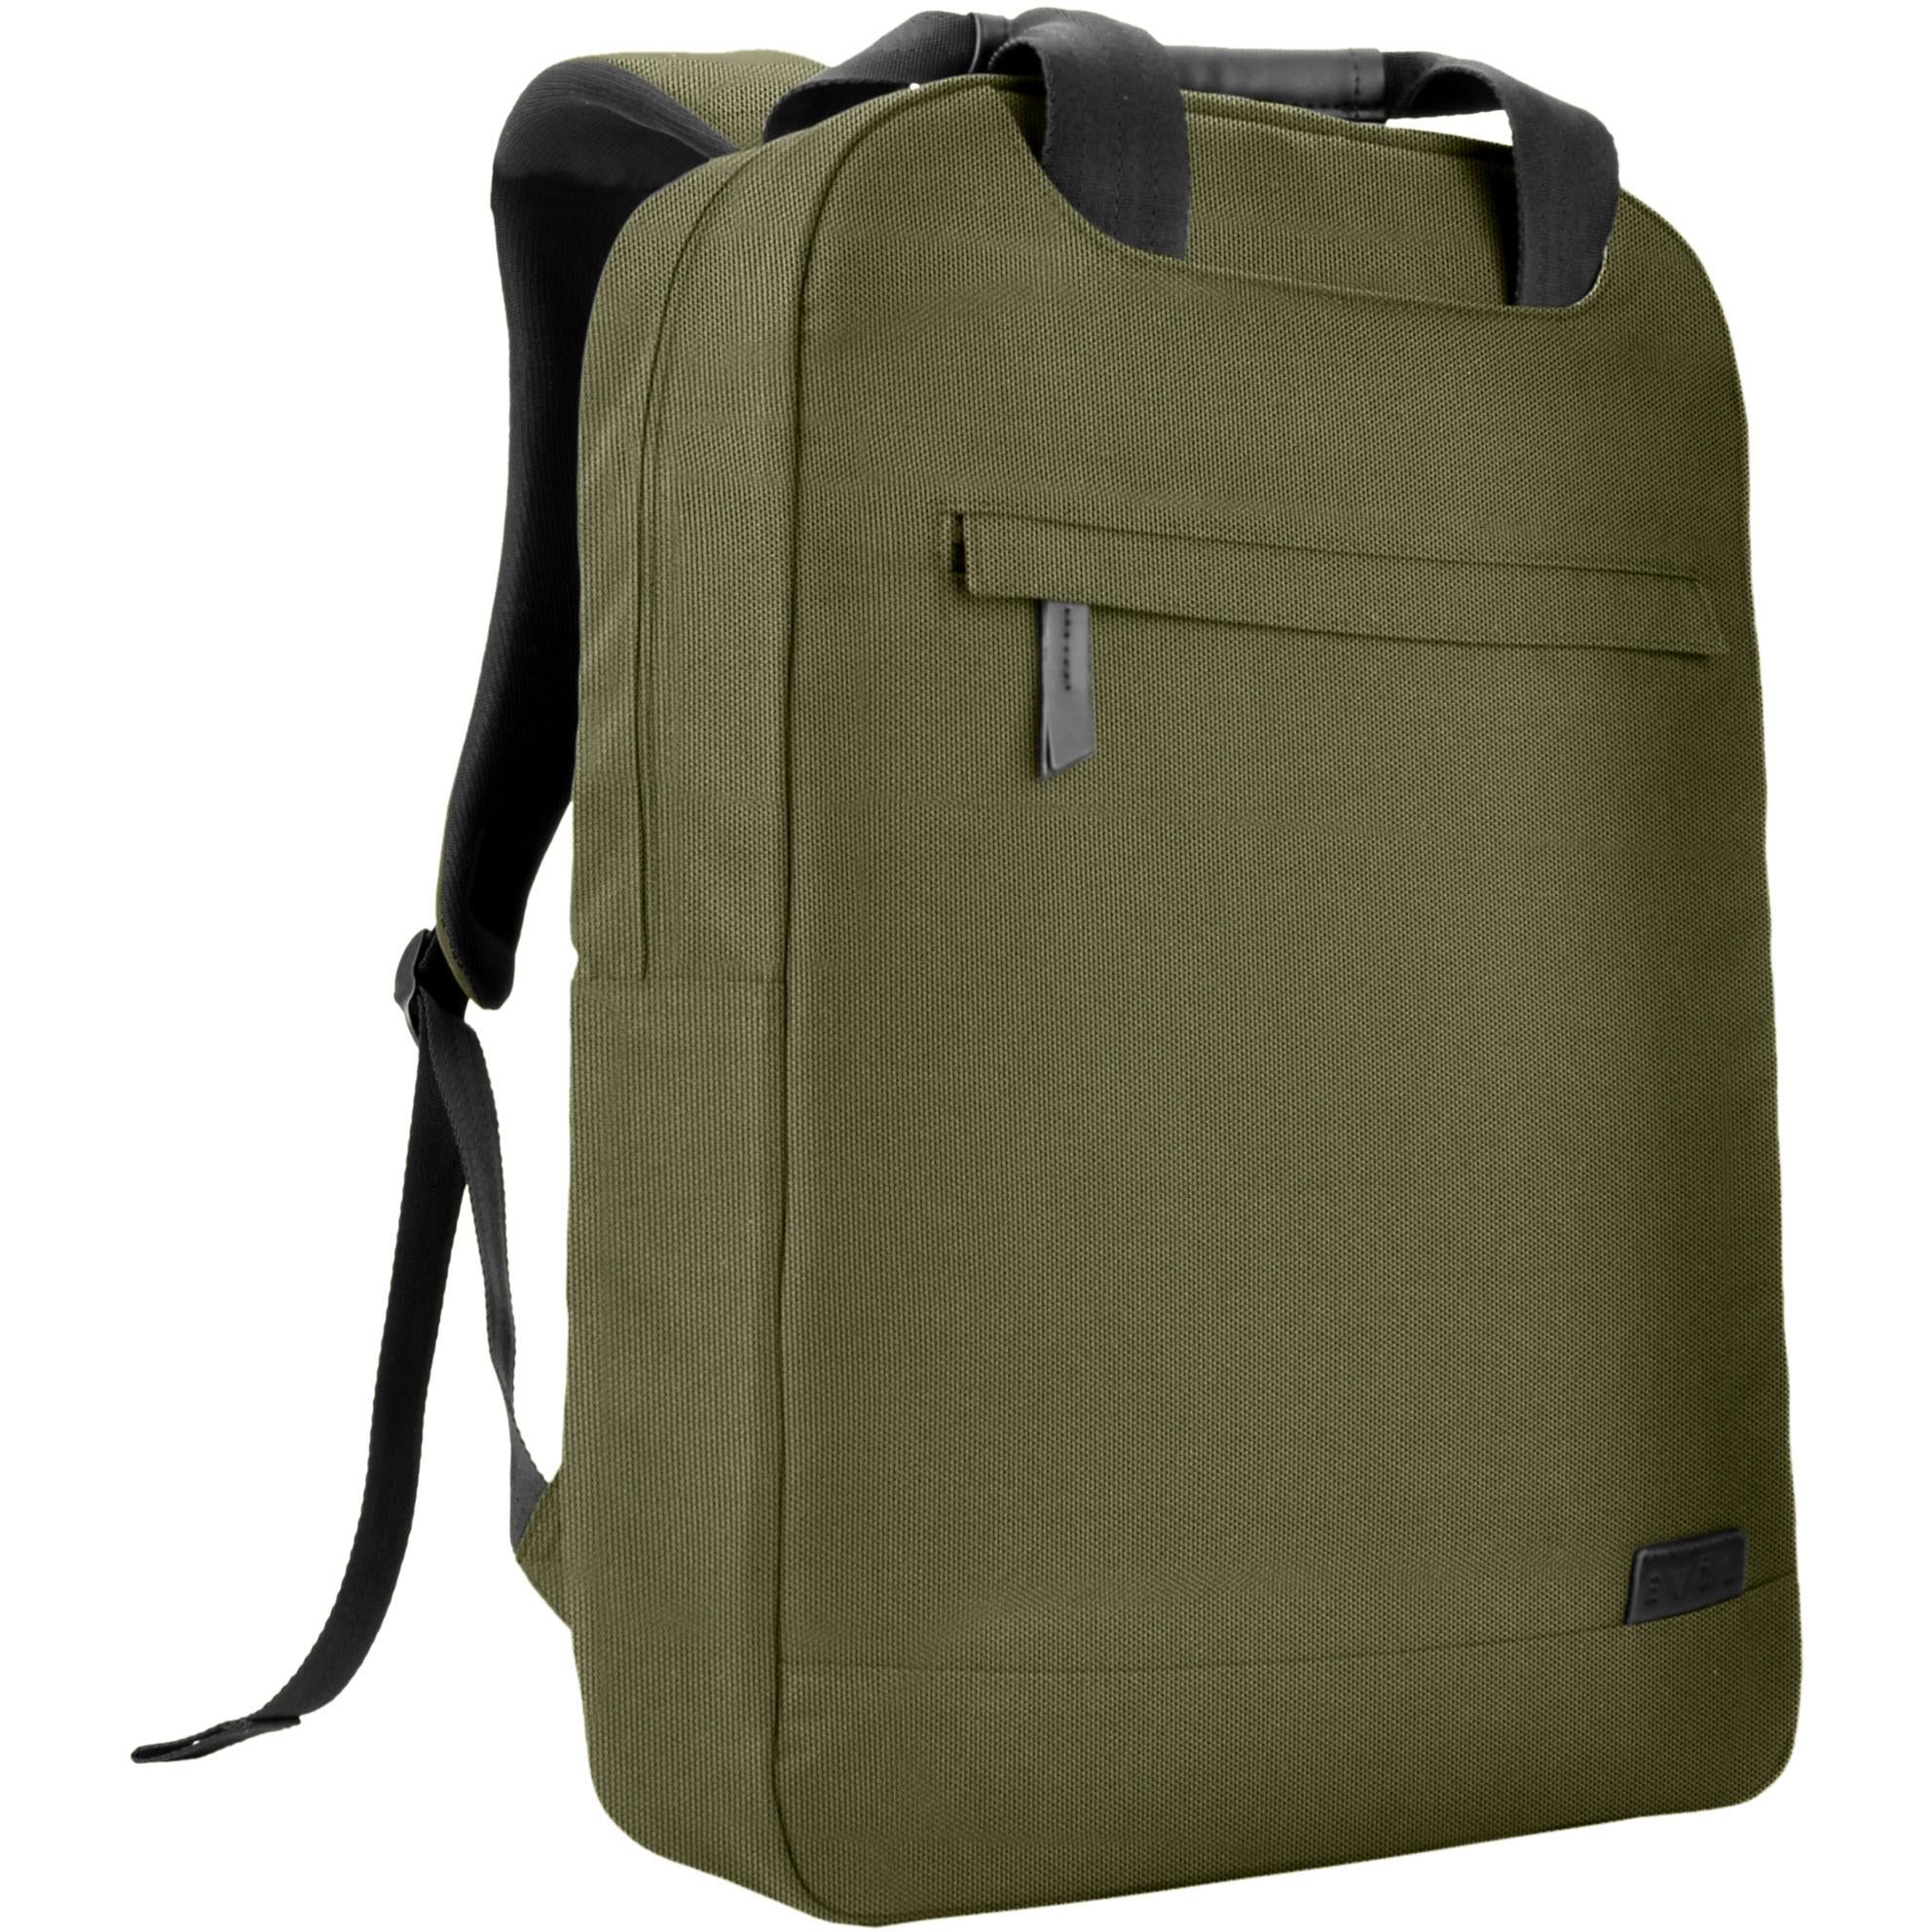 evol 15.6" recycled laptop backpack (olive)